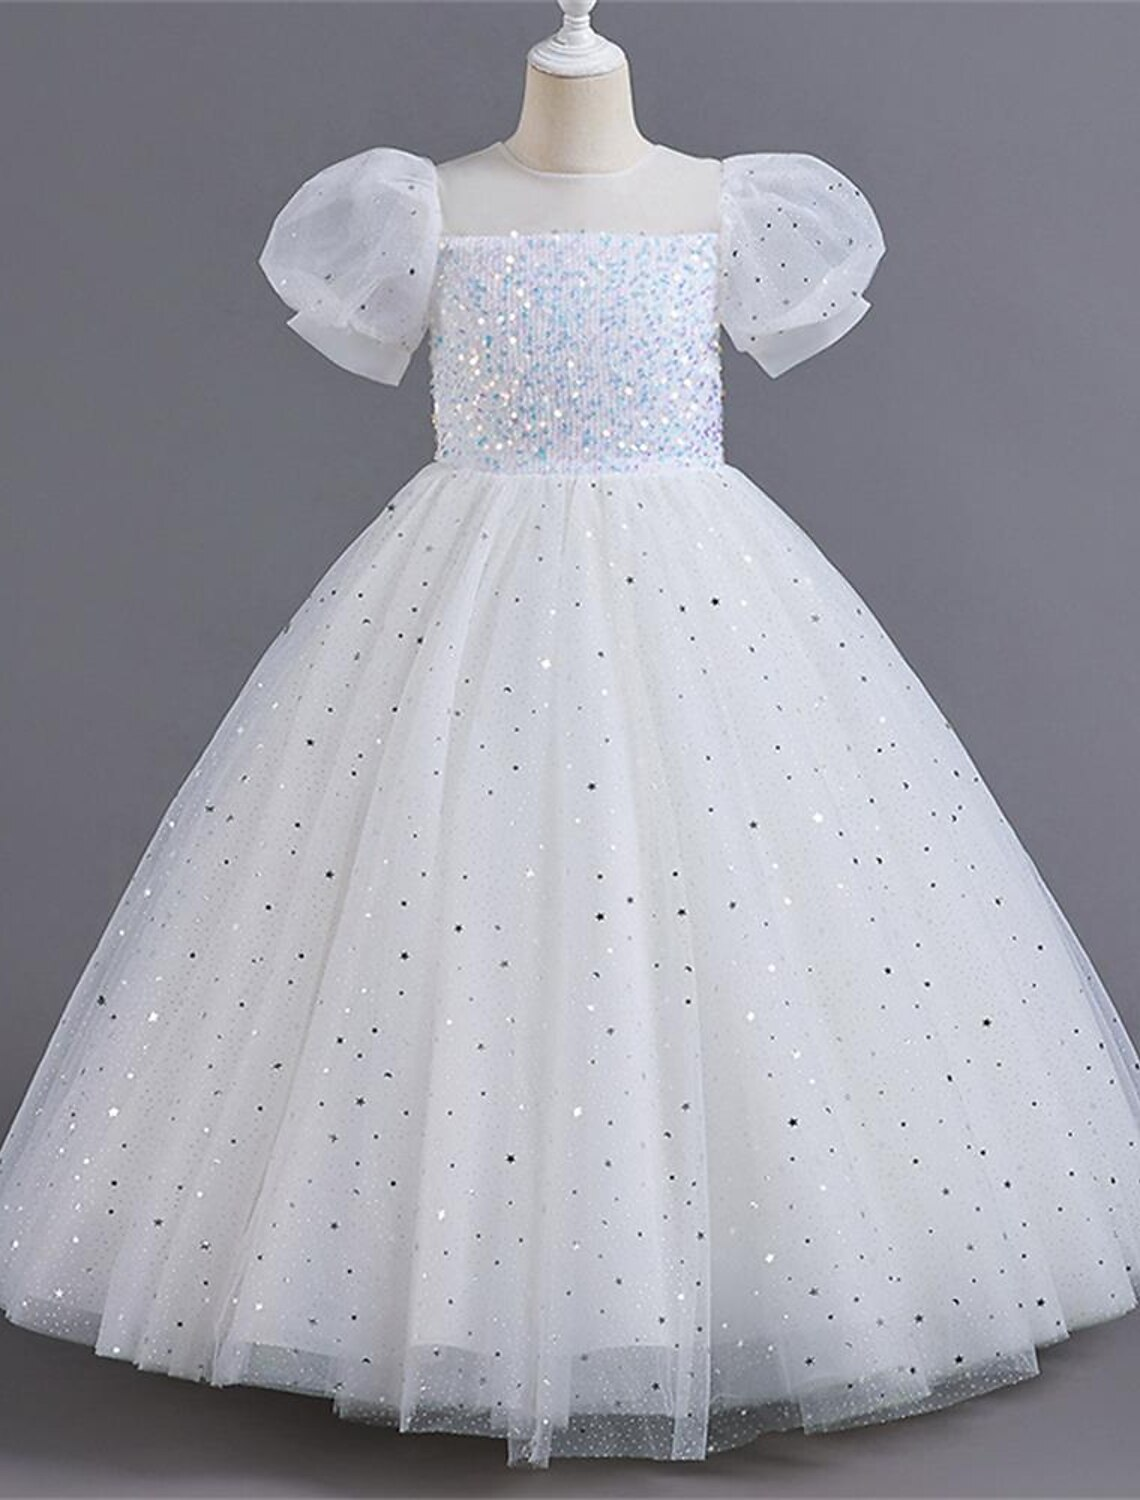 Kids Girls' Party Dress Solid Color Flower Short Sleeve Performance Wedding Sequins Elegant Princess Polyester Maxi Tulle Dress Summer Spring 4-13 Years Multicolor White Pink